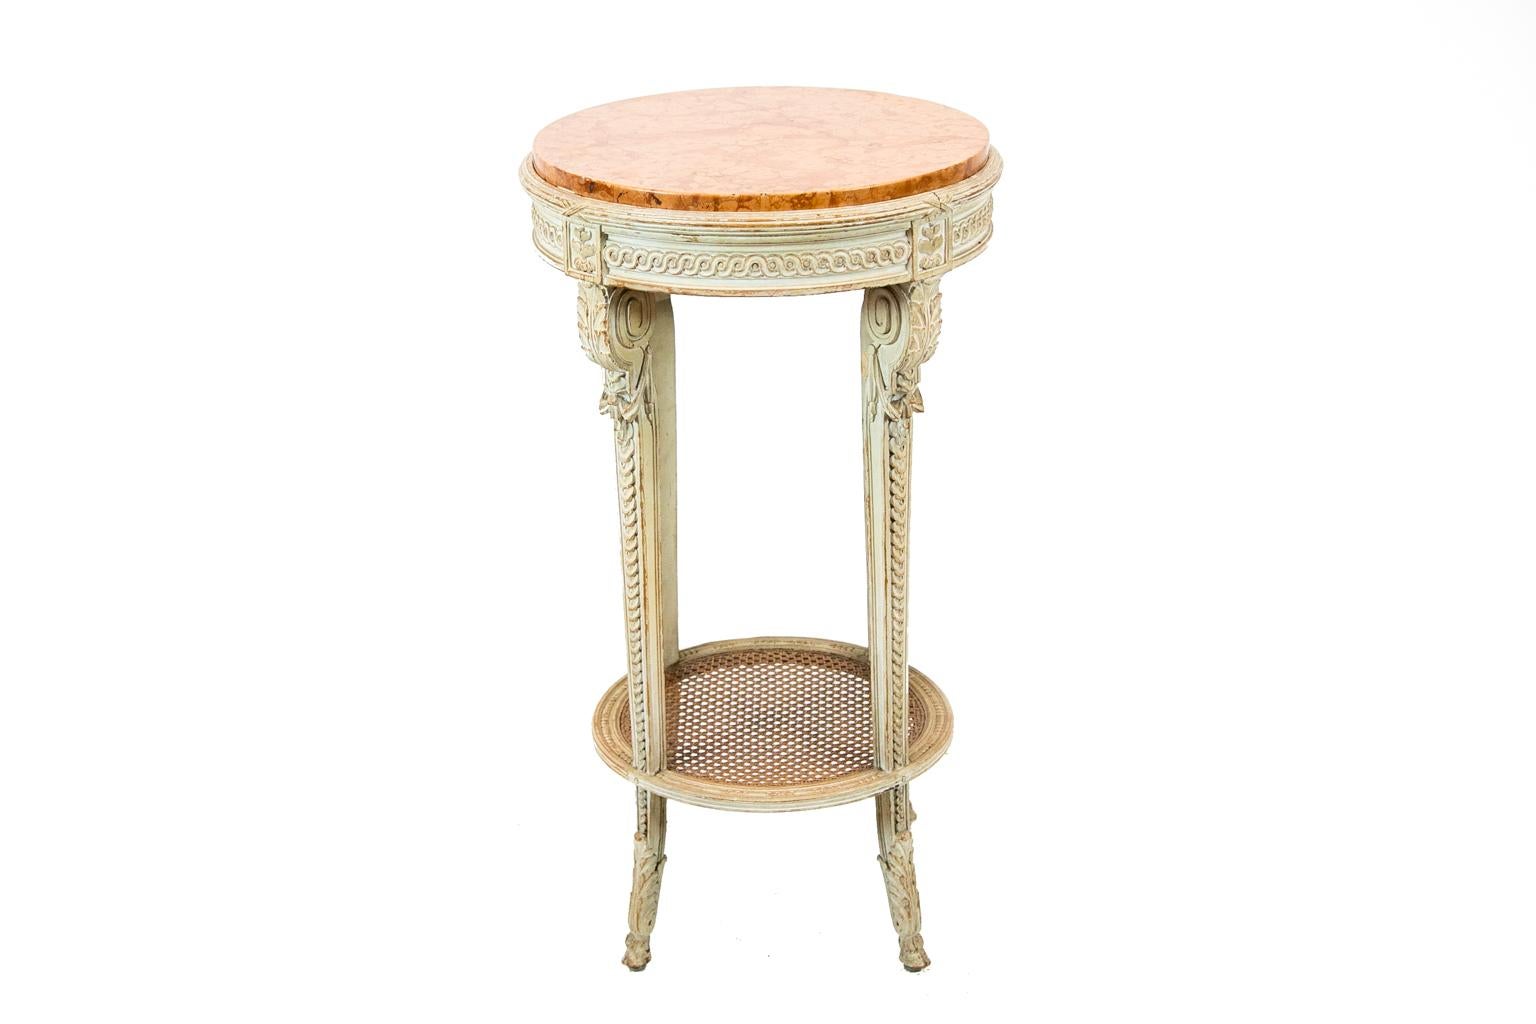 Late 19th Century French Painted Marble-Top Occasional Table